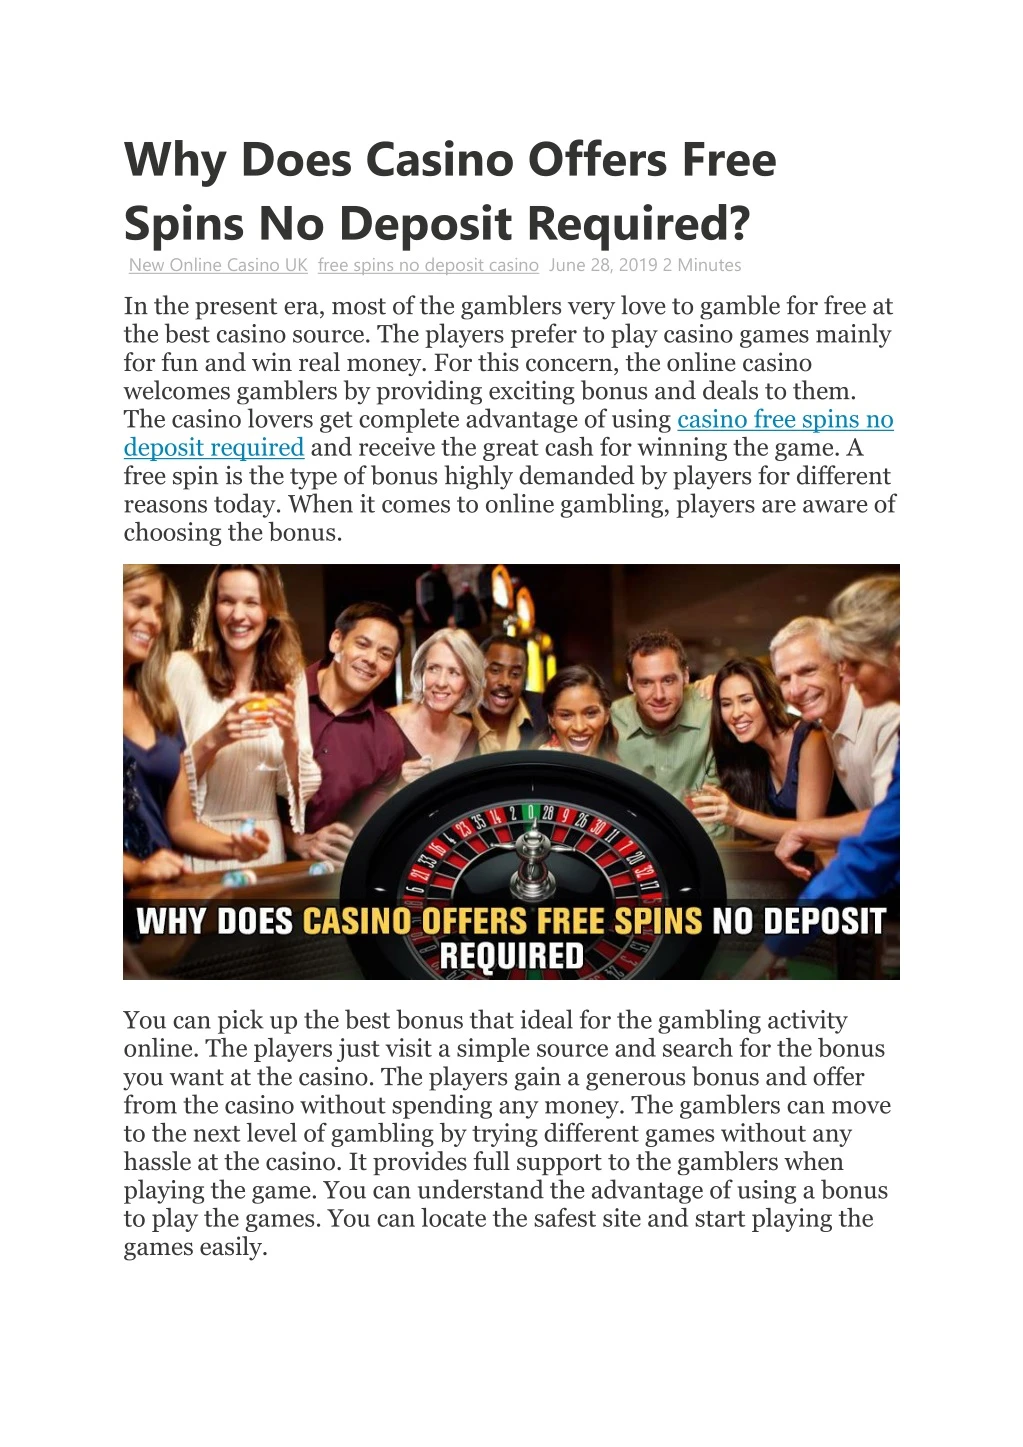 why does casino offers free spins no deposit